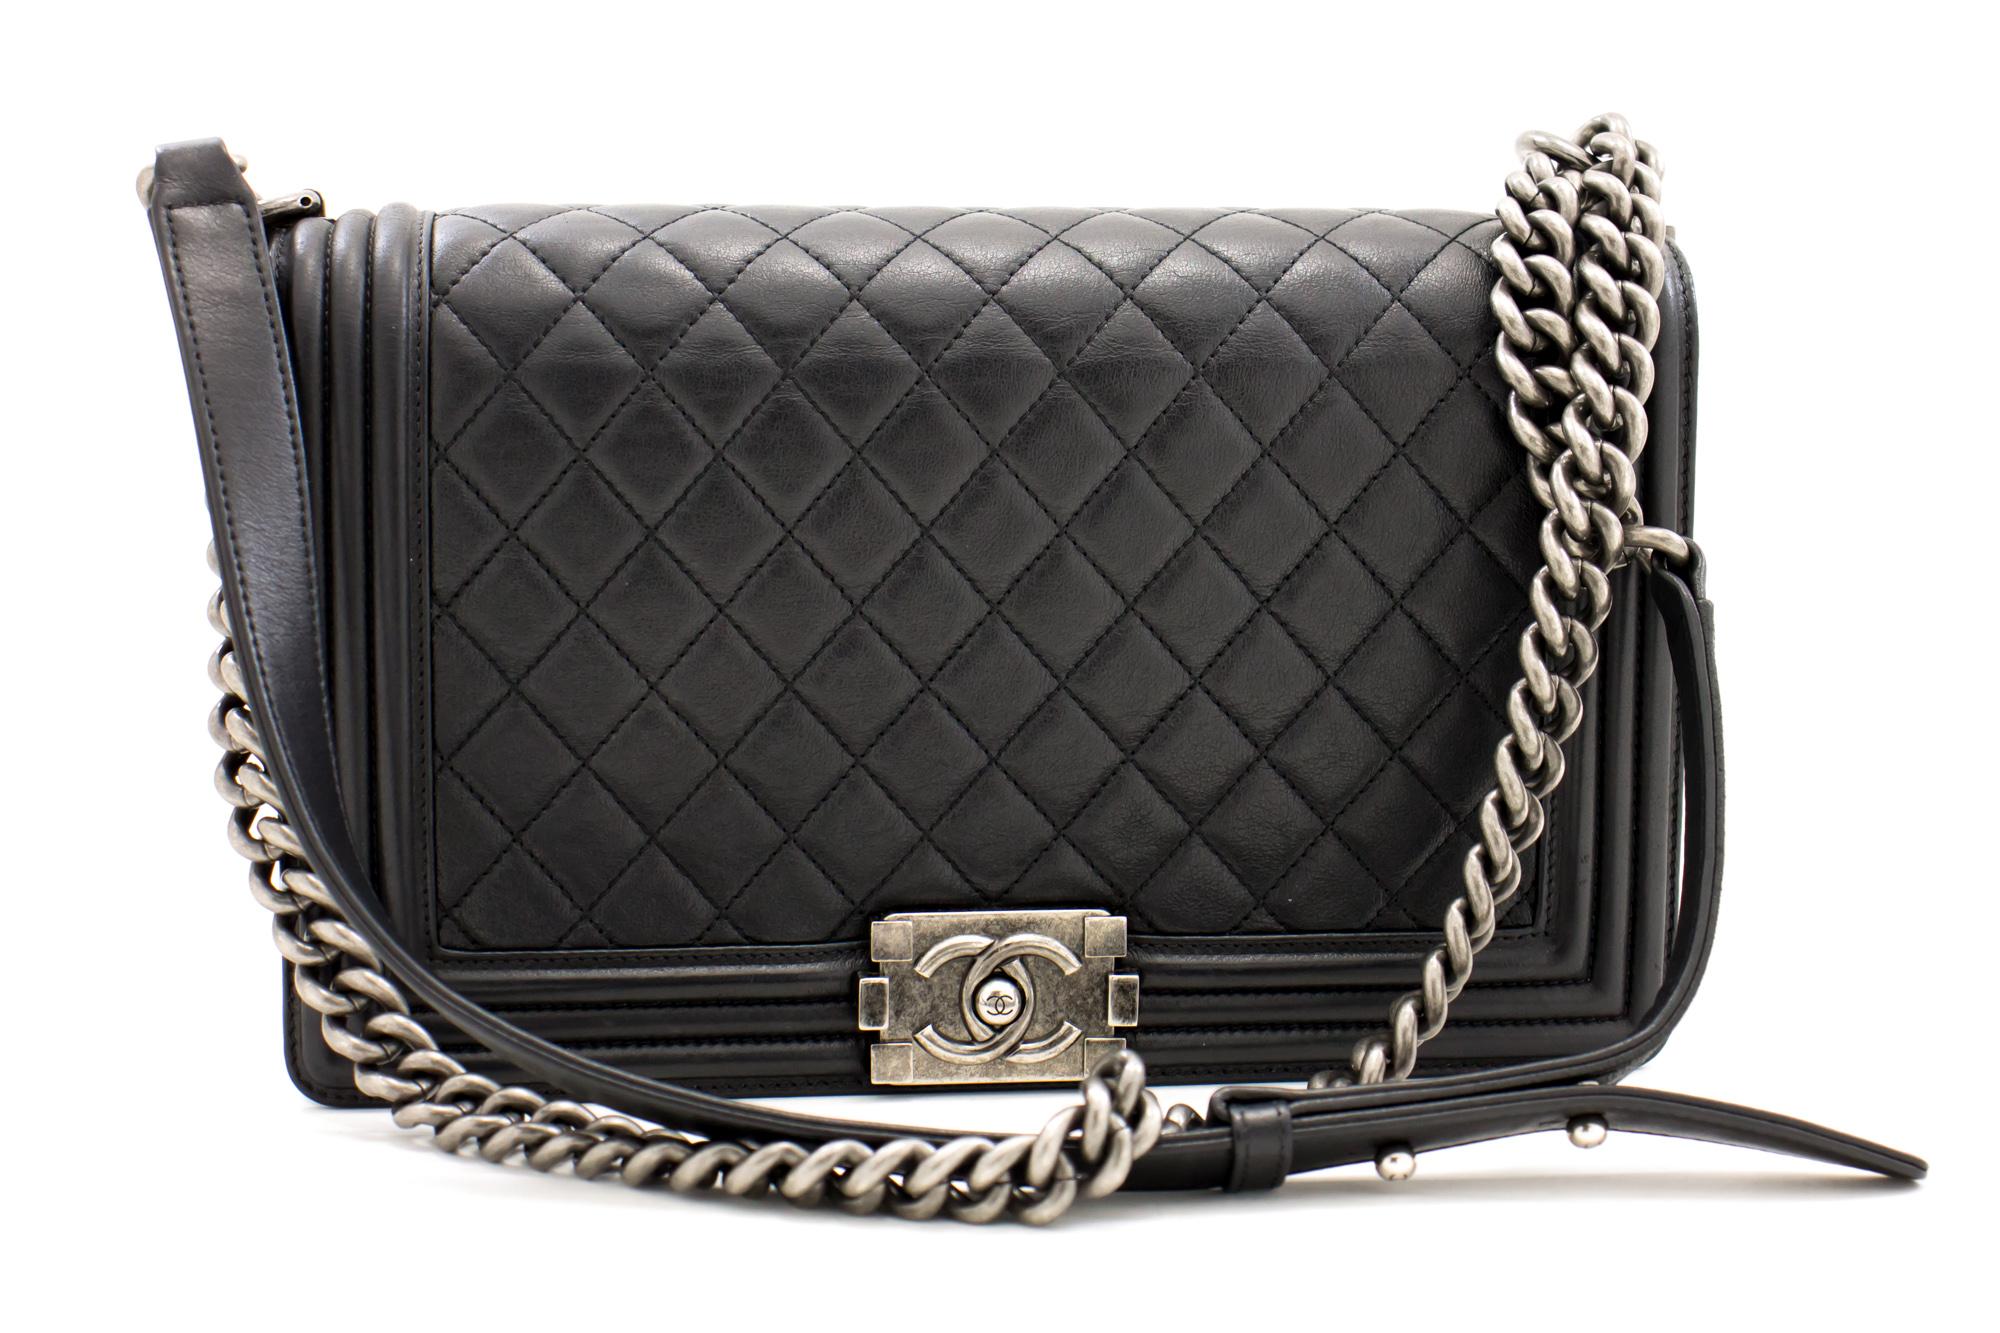 An authentic CHANEL Boy Chain Shoulder Bag Black Quilted Calfskin Leather Flap. The color is Black. The outside material is Leather. The pattern is Solid. This item is Contemporary. The year of manufacture would be 2014.
Conditions & Ratings
Outside